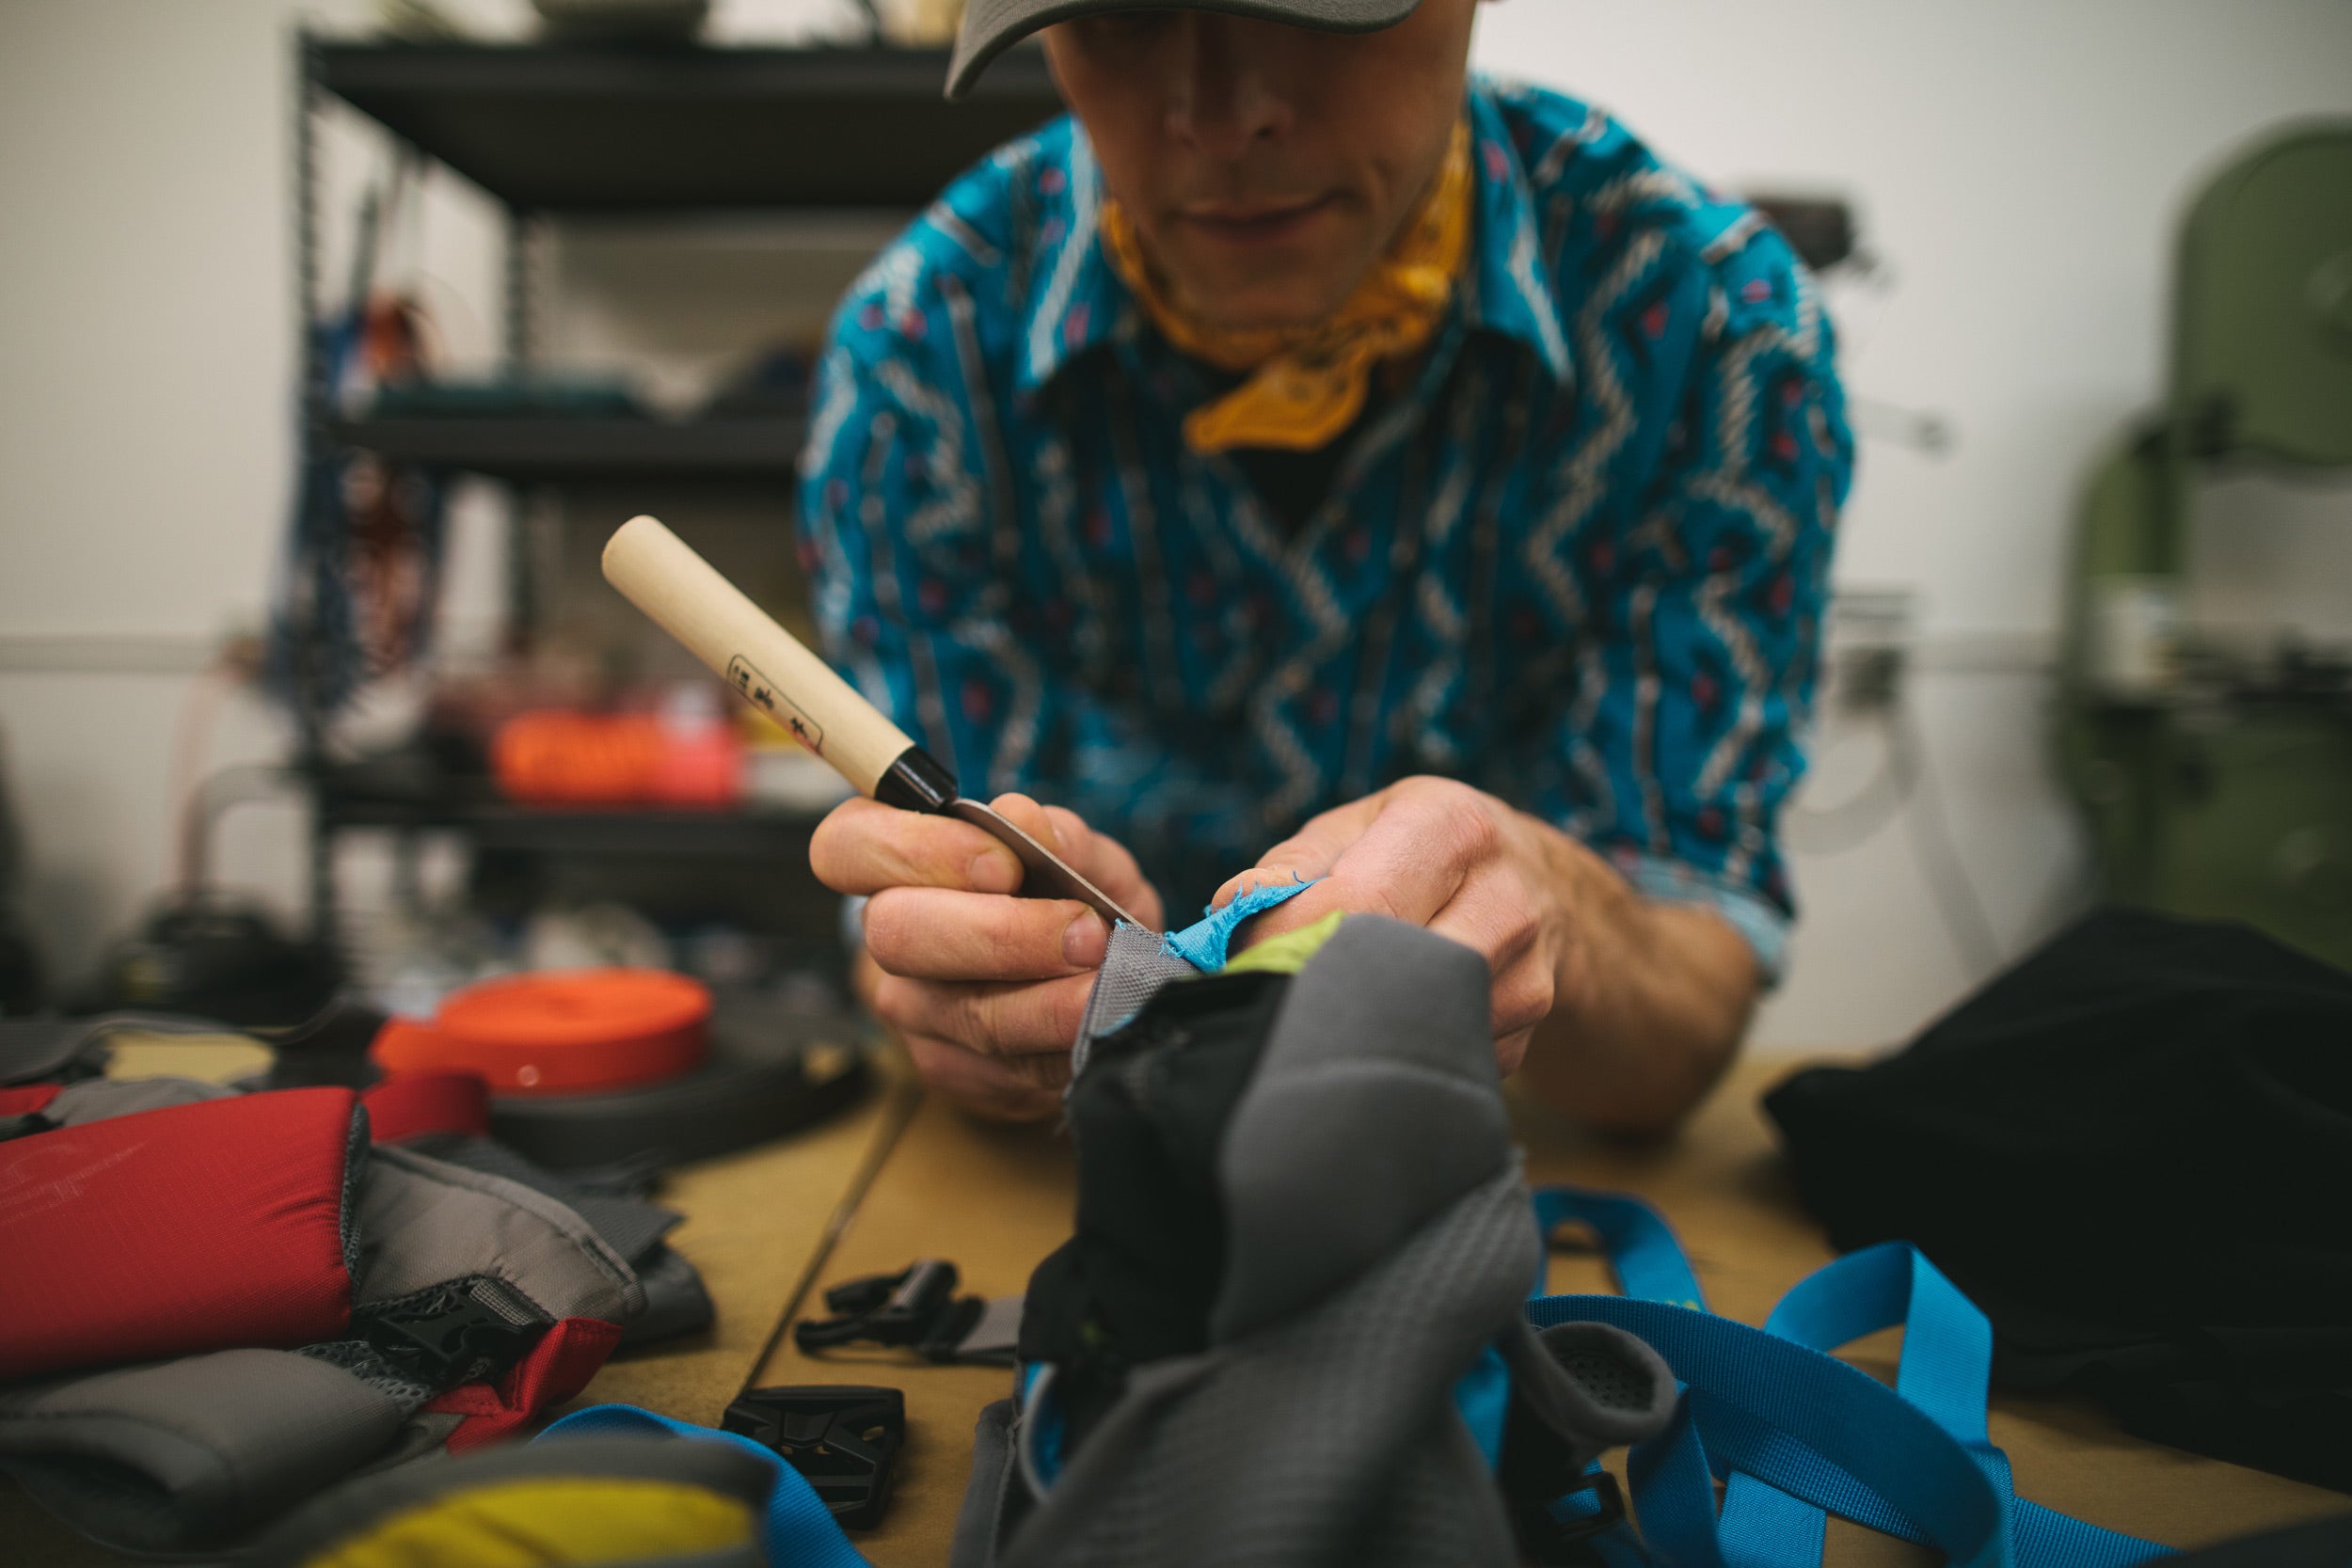 Timothy works to craft product in the Ruffwear product development studio.